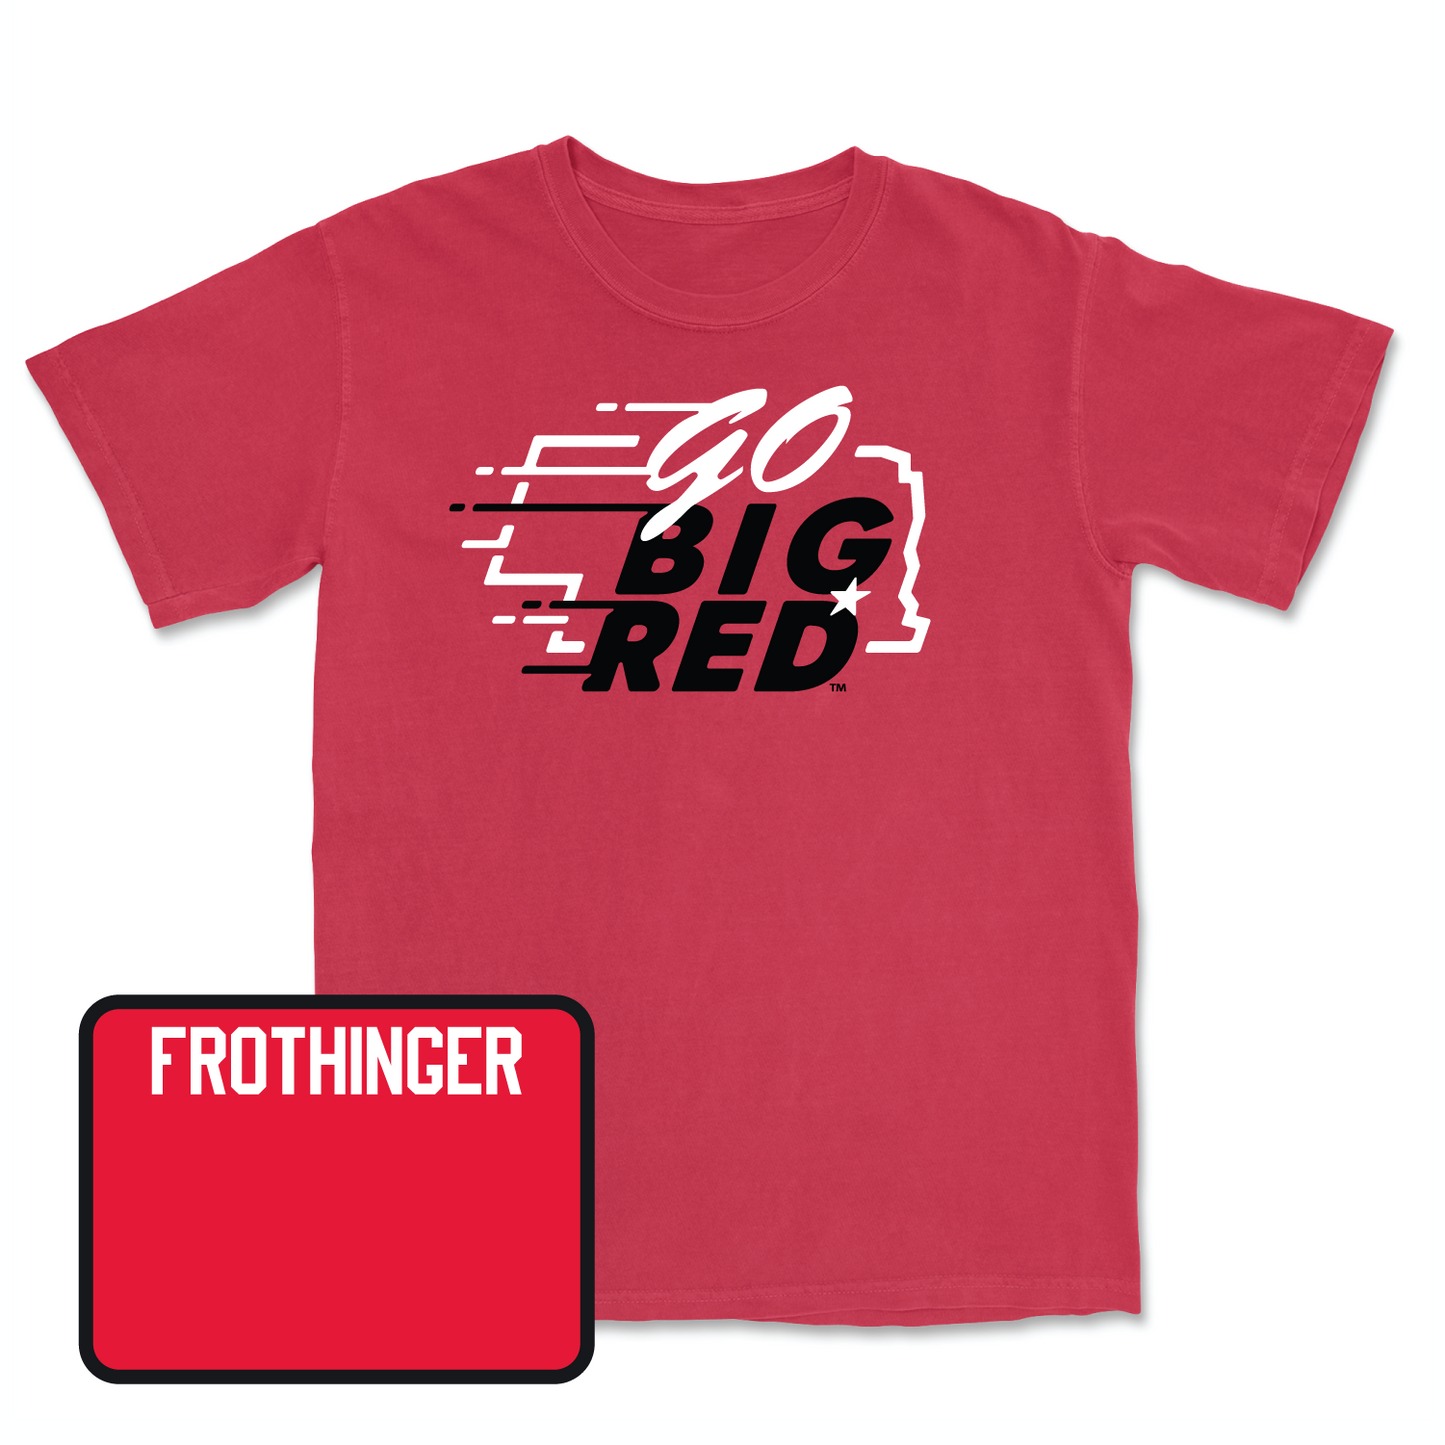 Red Wrestling GBR Tee Small / Tanner Frothinger | #141